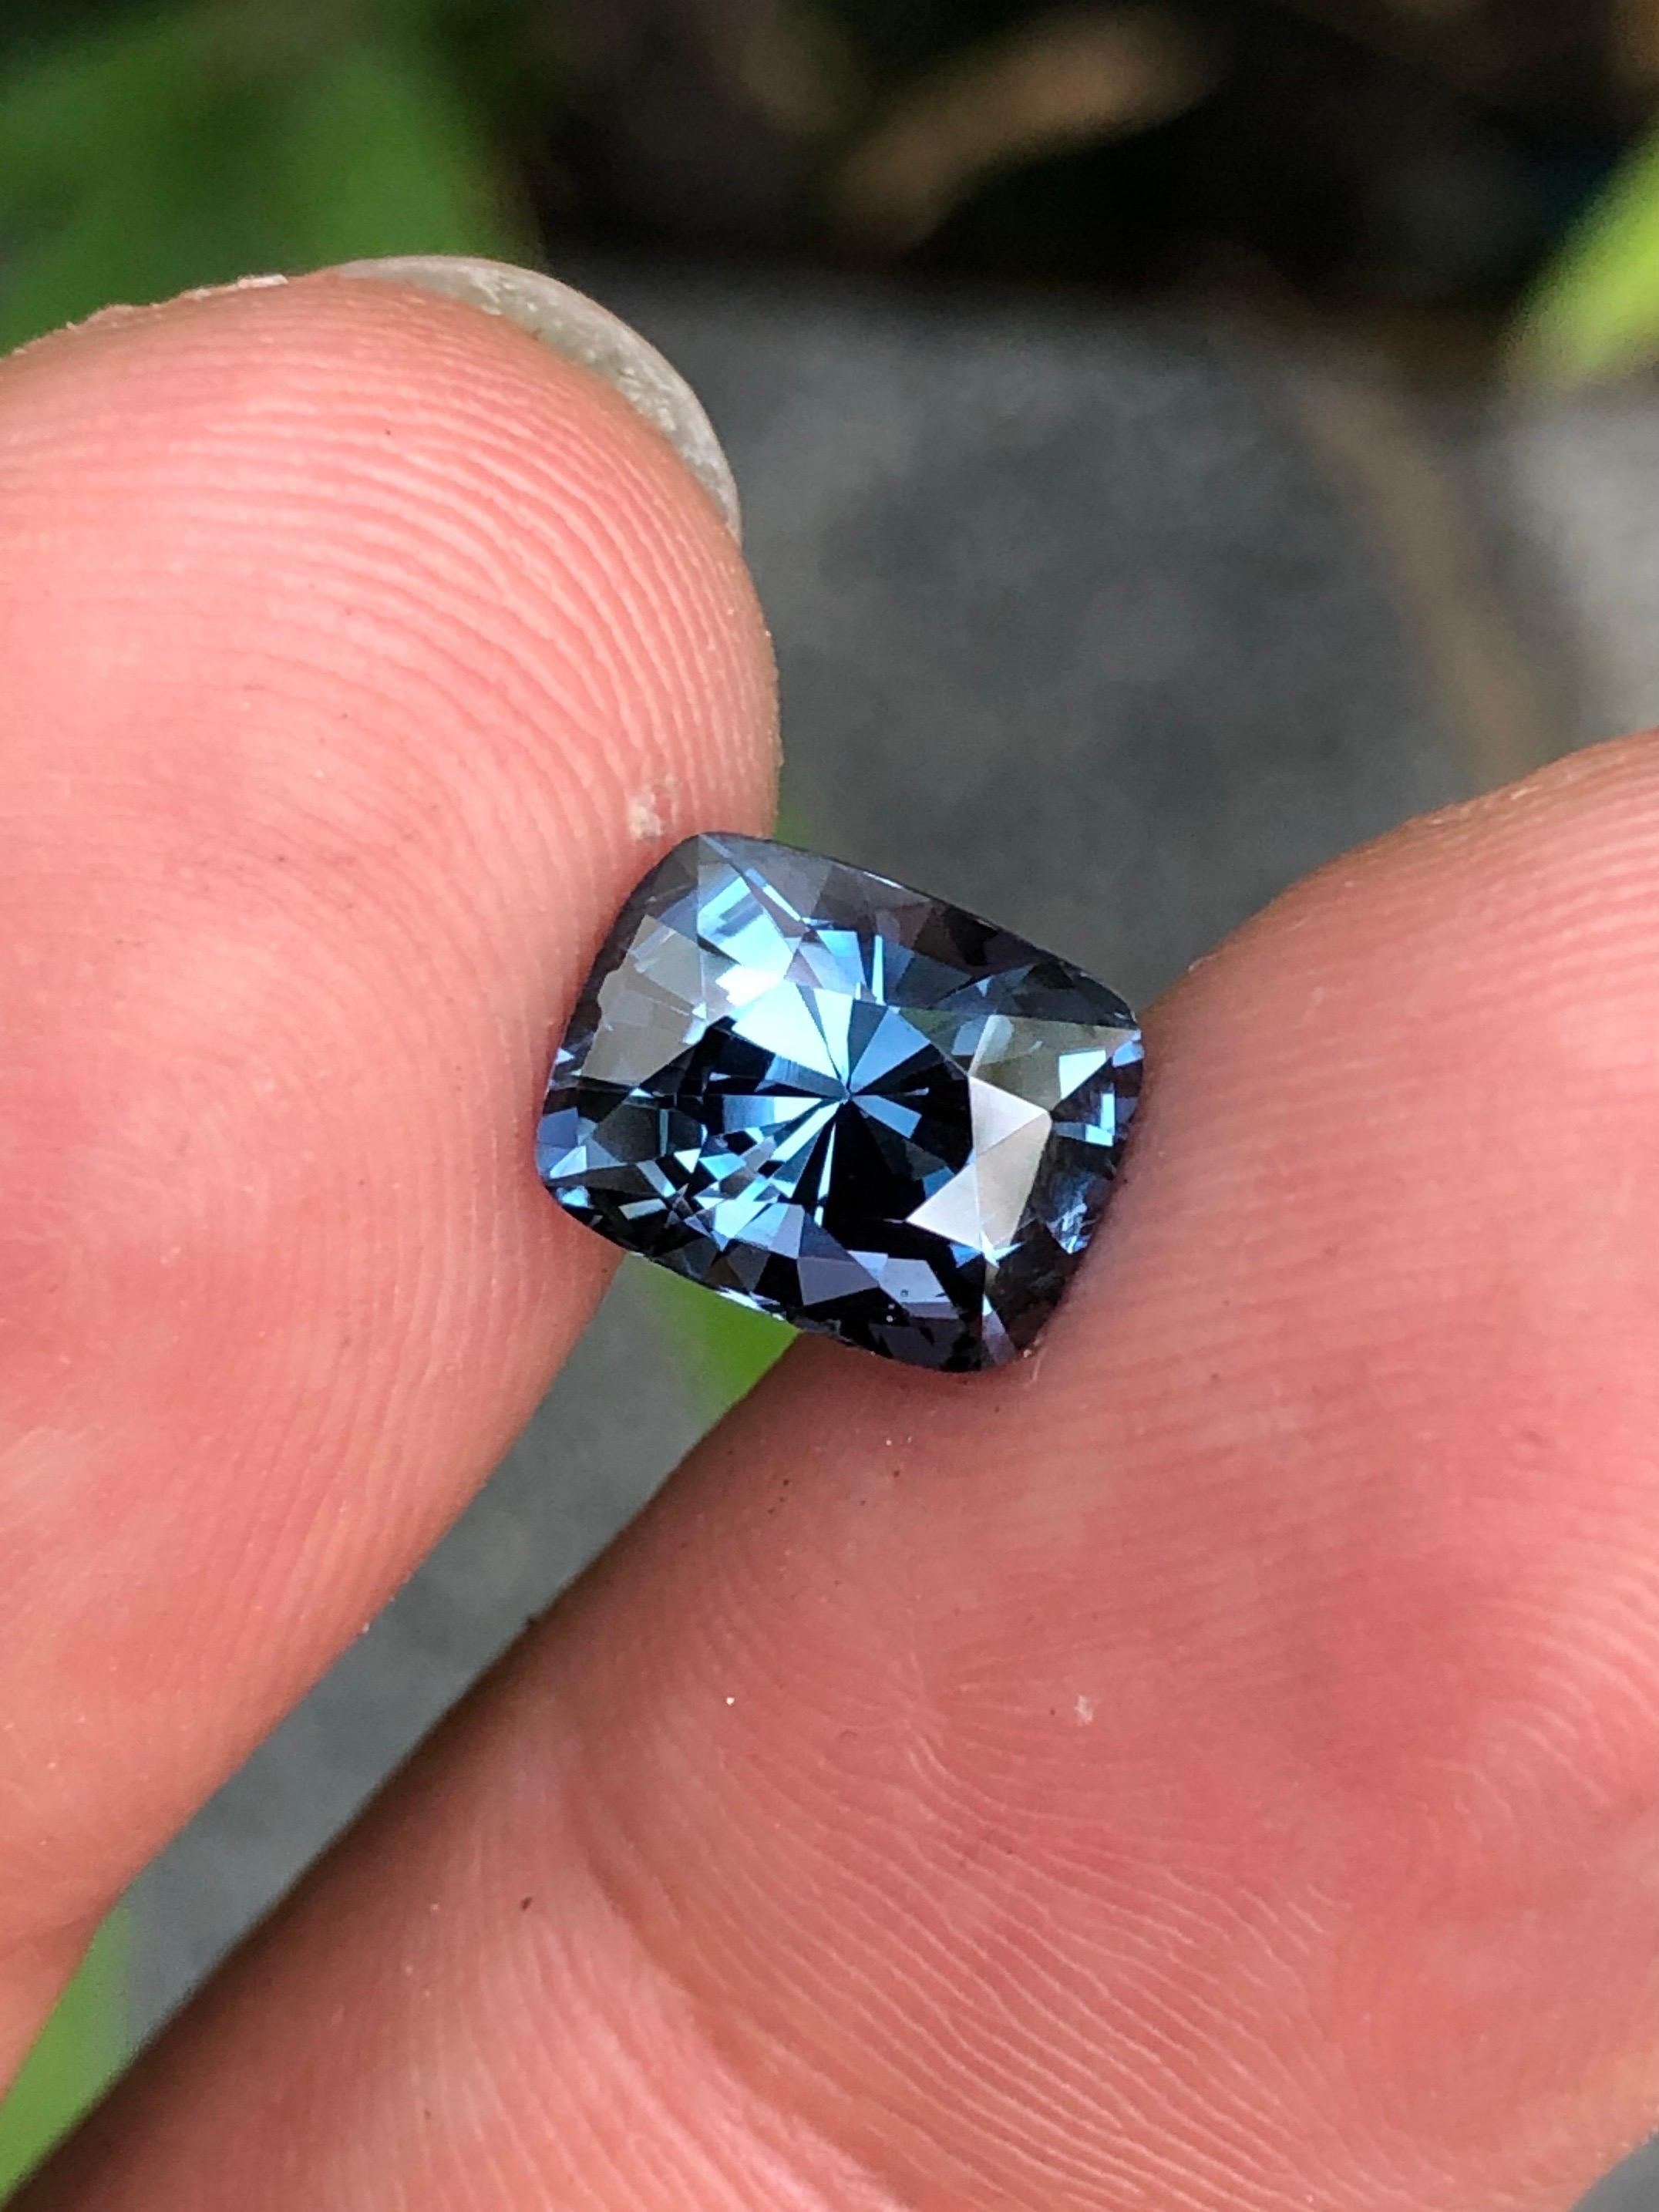 Introducing a stunning electric blue spinel with a carat weight of 3.11 ct. Its brilliant cushion cut showcases a marvelous blue shade, making it a truly exceptional gemstone!
————————————————-
Stone💎:Spinel 
Color💈: Blue 
Clarity💧: vvs- Eye